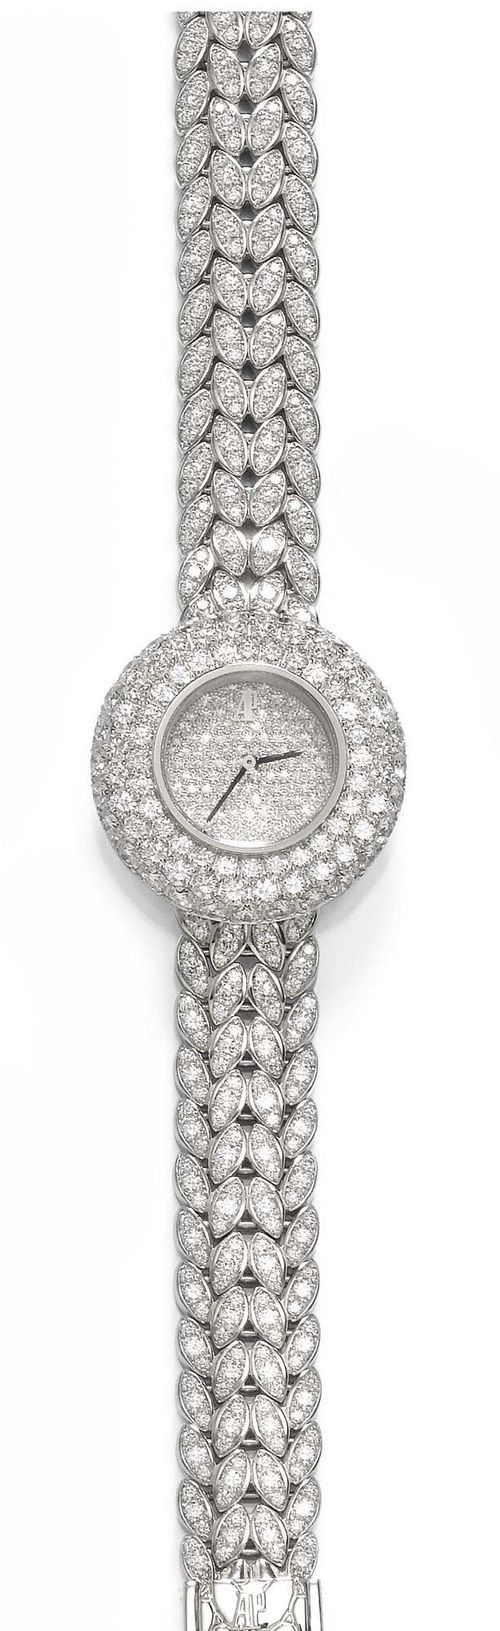 DIAMOND LADY'S WRISTWATCH AUDEMARS PIGUET, 1980s. White gold 750. Ref. BC 66976/Z/1069BC/01. Very fancy model, set throughout with diamonds weighing ca. 7.50 ct. Round case No. E07939 with adjustment button on the back. Diamond dial with black hands, signed AP. Hand winder, movement 466103, Cal. 2601, signed. Elegant bracelet with stylized, diamond-set leaf motifs, L ca. 15.5 cm. D 26 mm. With 2 extension elements measuring ca. 2.8 cm together, case, certificate of origin and warranty, and copy of the insurance estimate, December 1998.